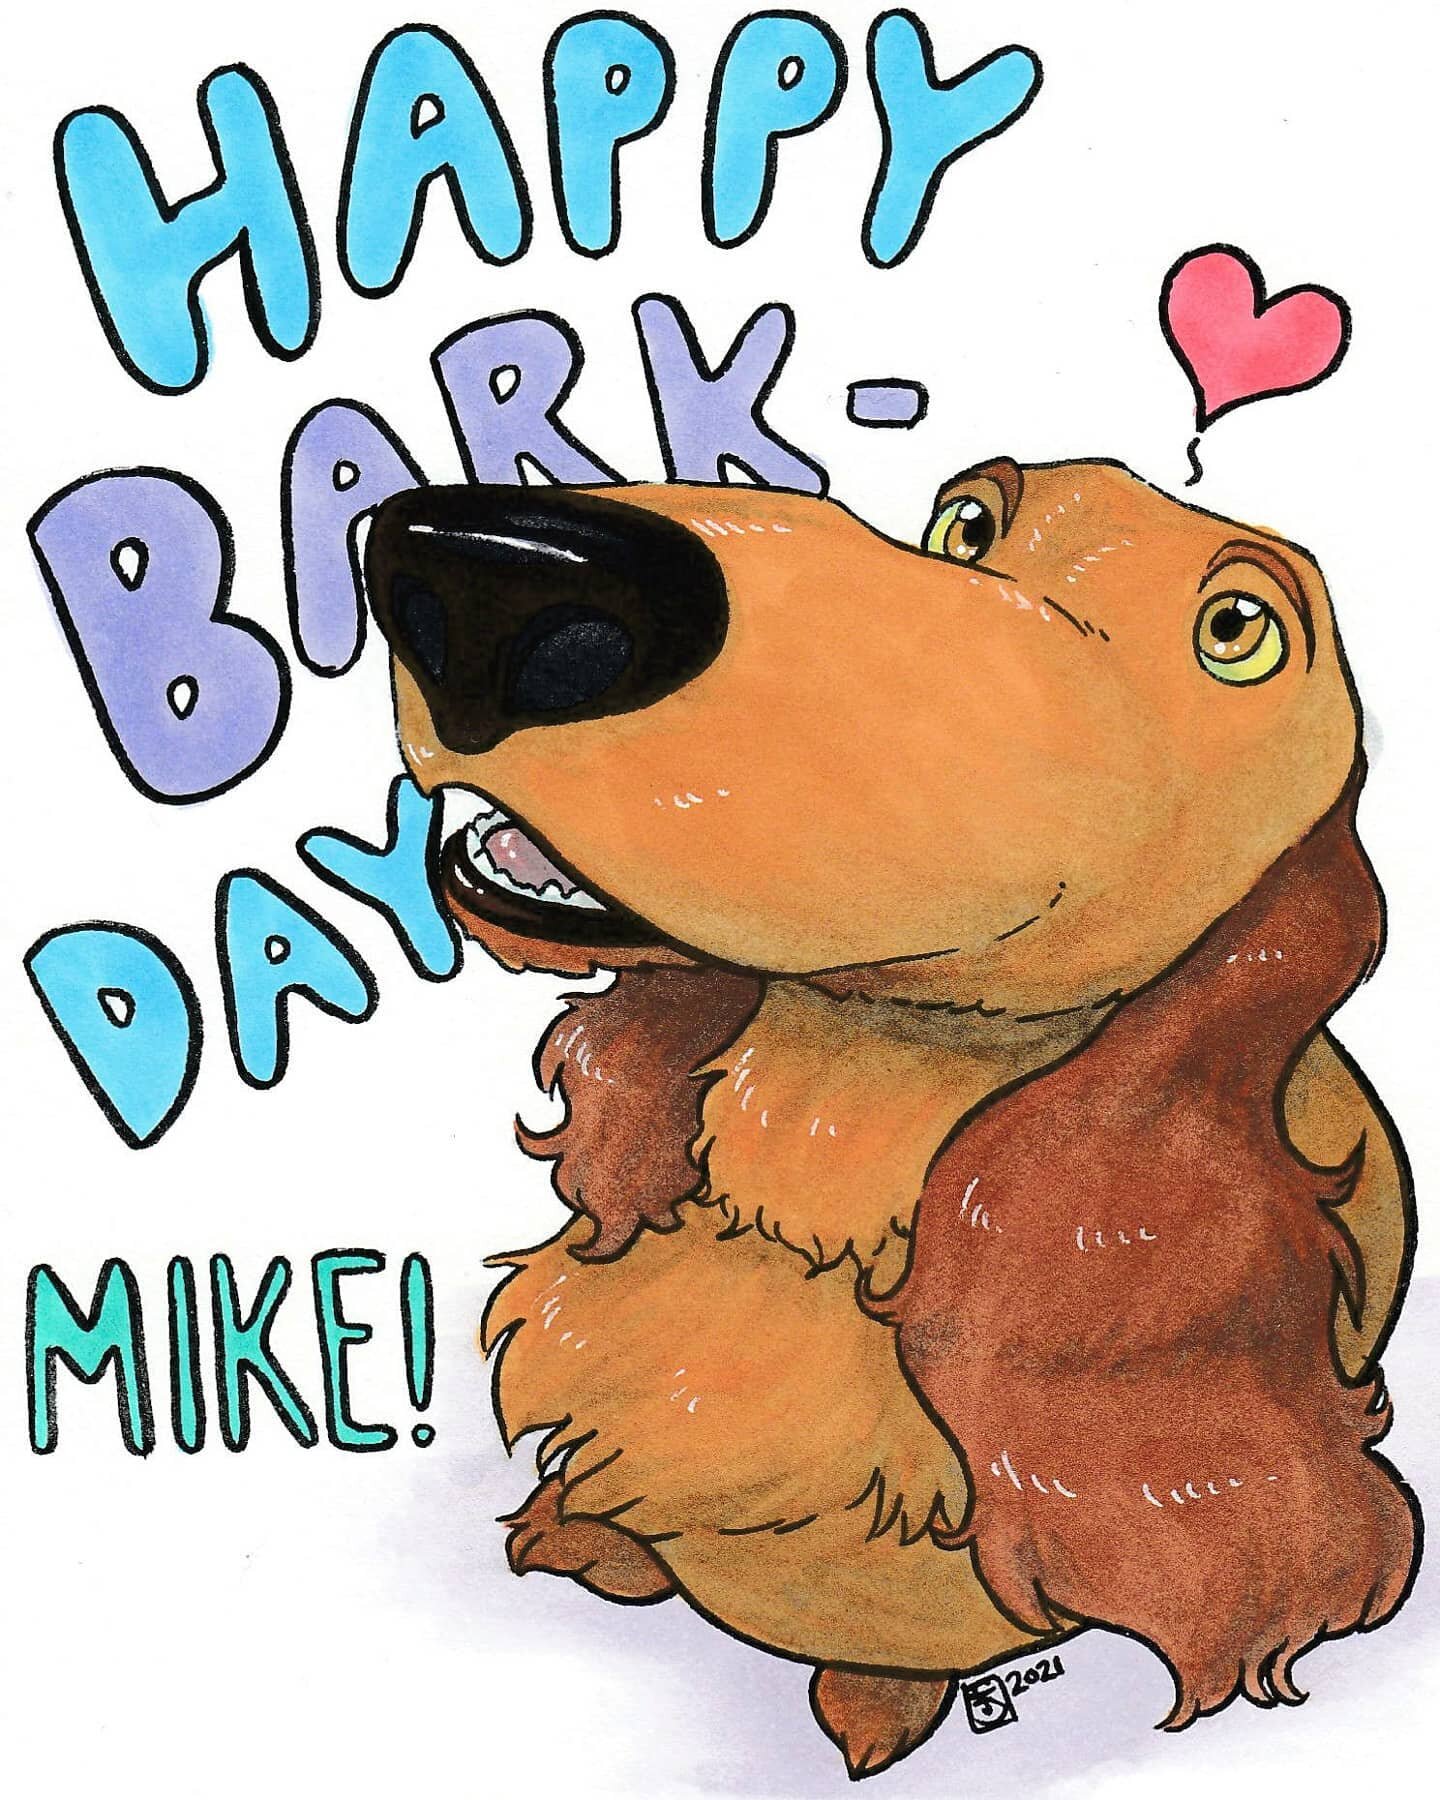 @nickcaligo42 has a birthday coming up on Wednesday, and he's always been an excellent client, a loyal patron, and most importantly, a good friend. That's why I drew his pupper Douglas and am sending him the original marker drawing! Happy birthday Mi